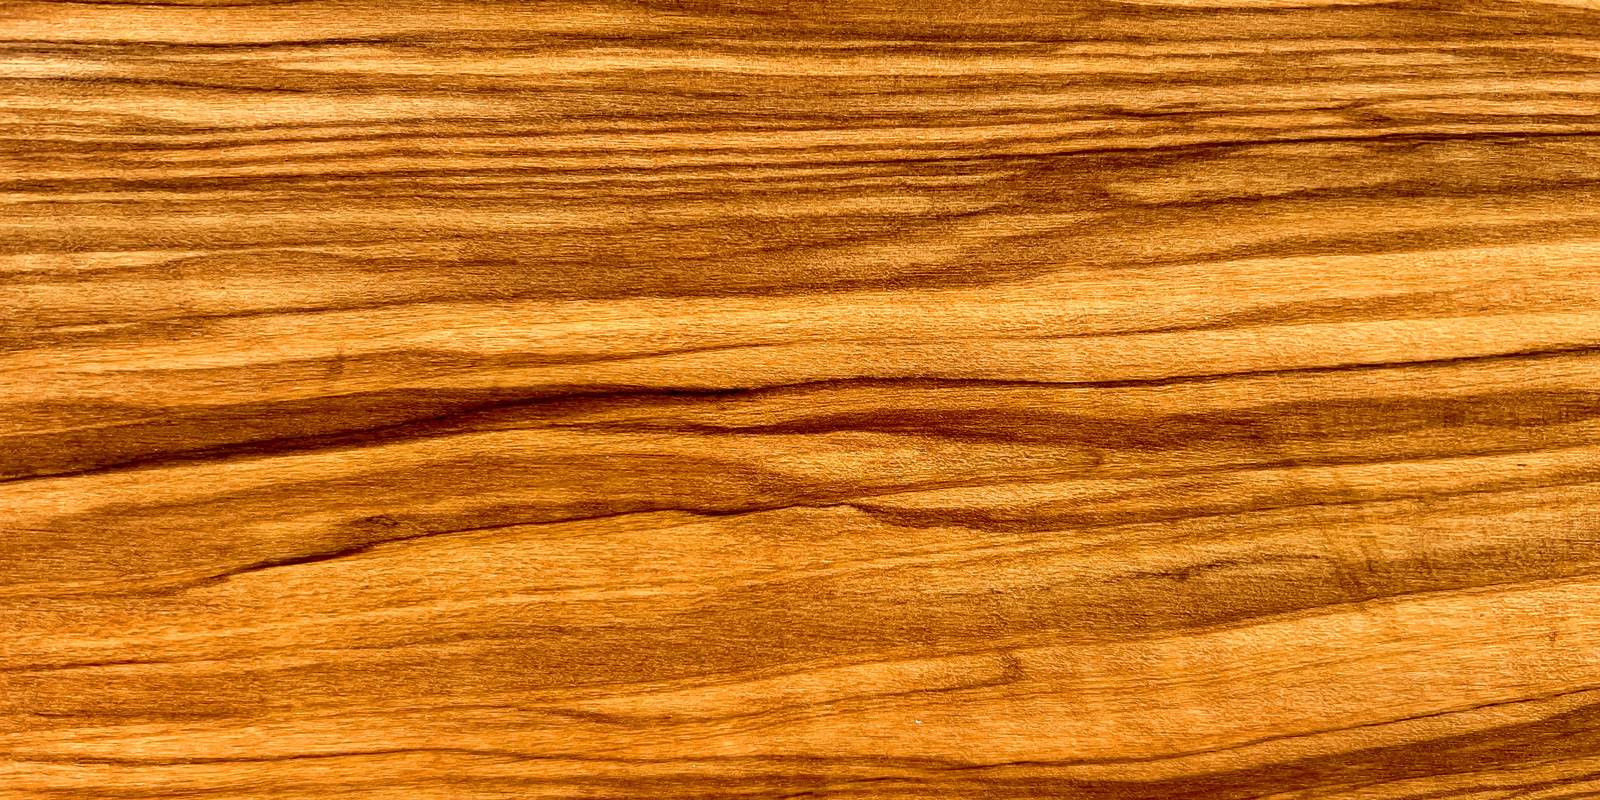 Olive wood products Beautifully grained olive wood items that bring a warm tone to the table.